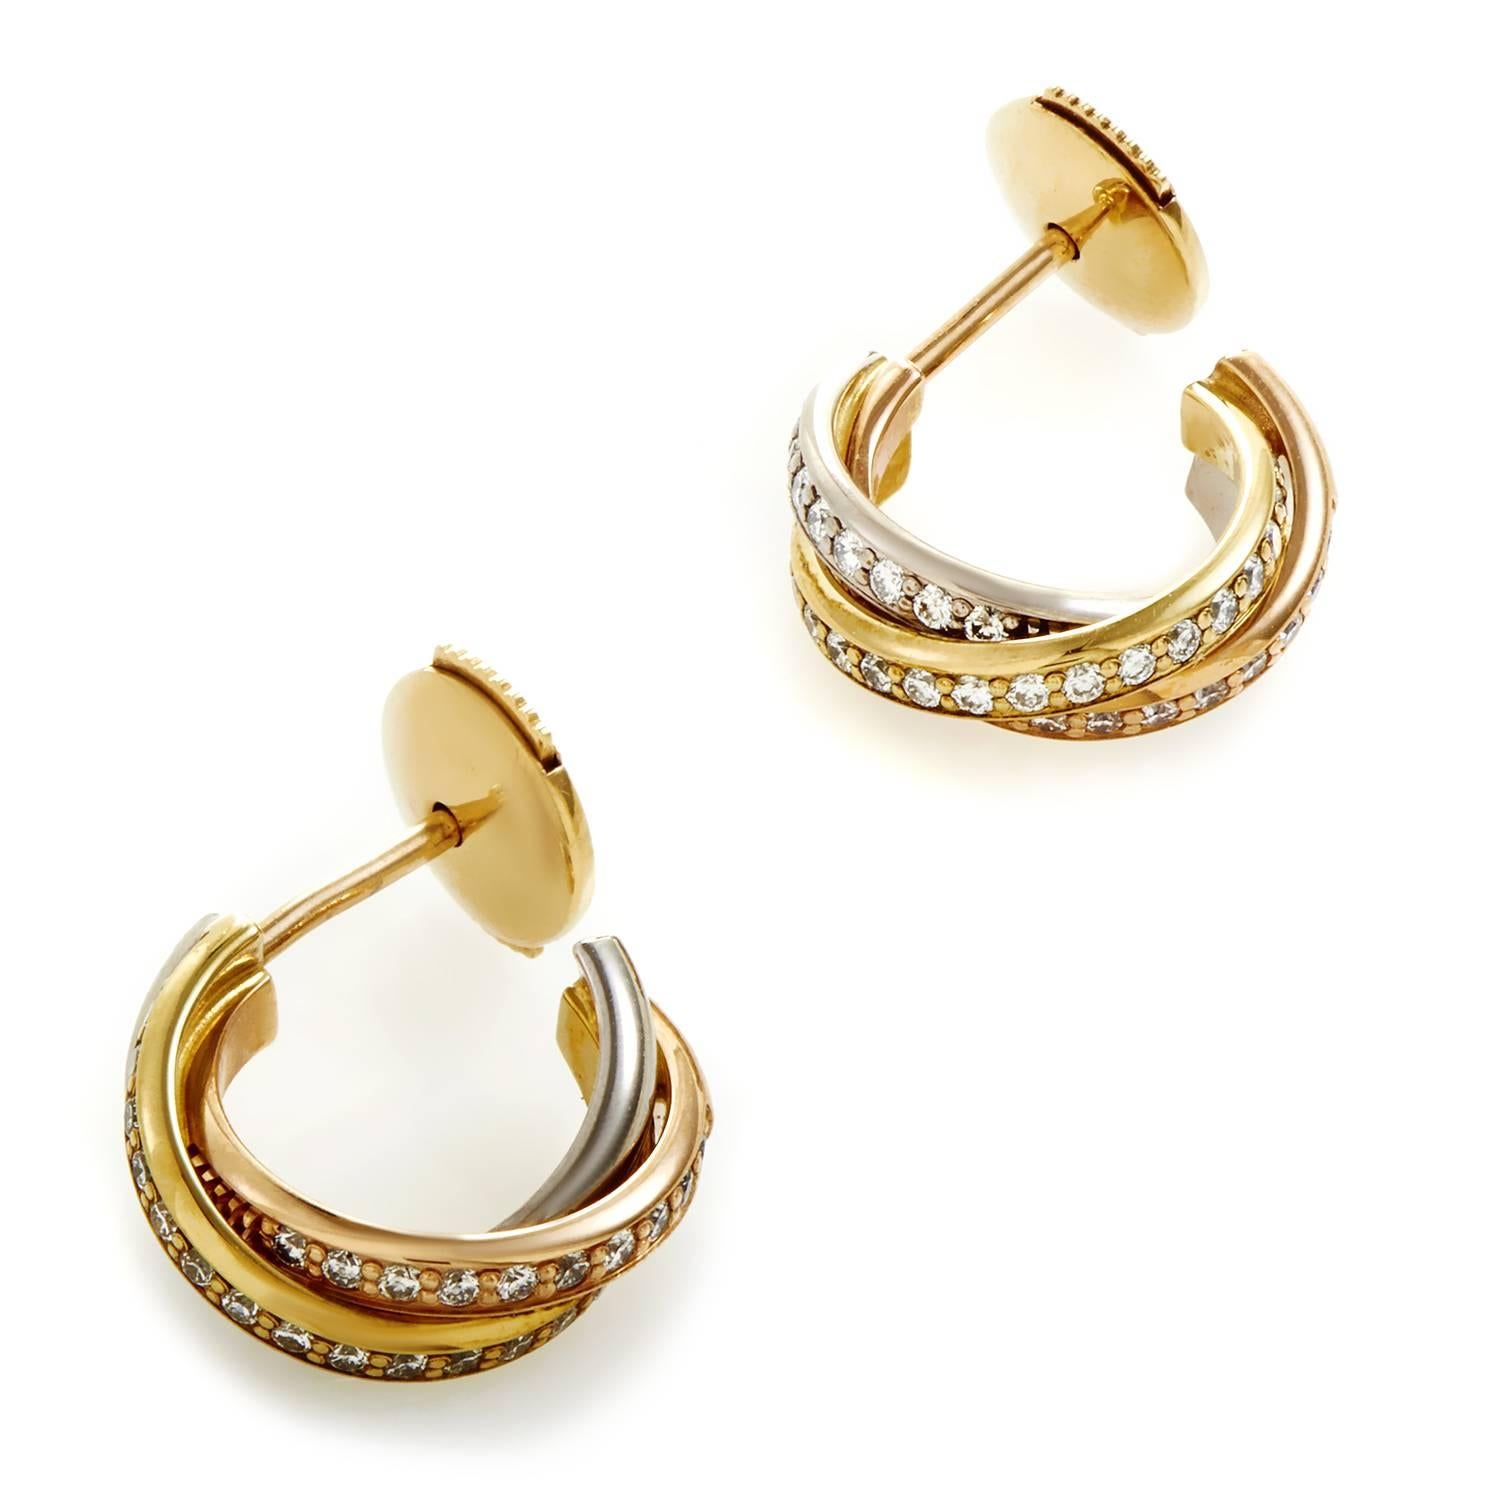 In keeping with the historic legacy of the iconic Trinity design introduced by the brand in the first half of the 20th century, these delightfully feminine earrings from Cartier boast a tasteful blend of 18K yellow, white and rose gold embellished